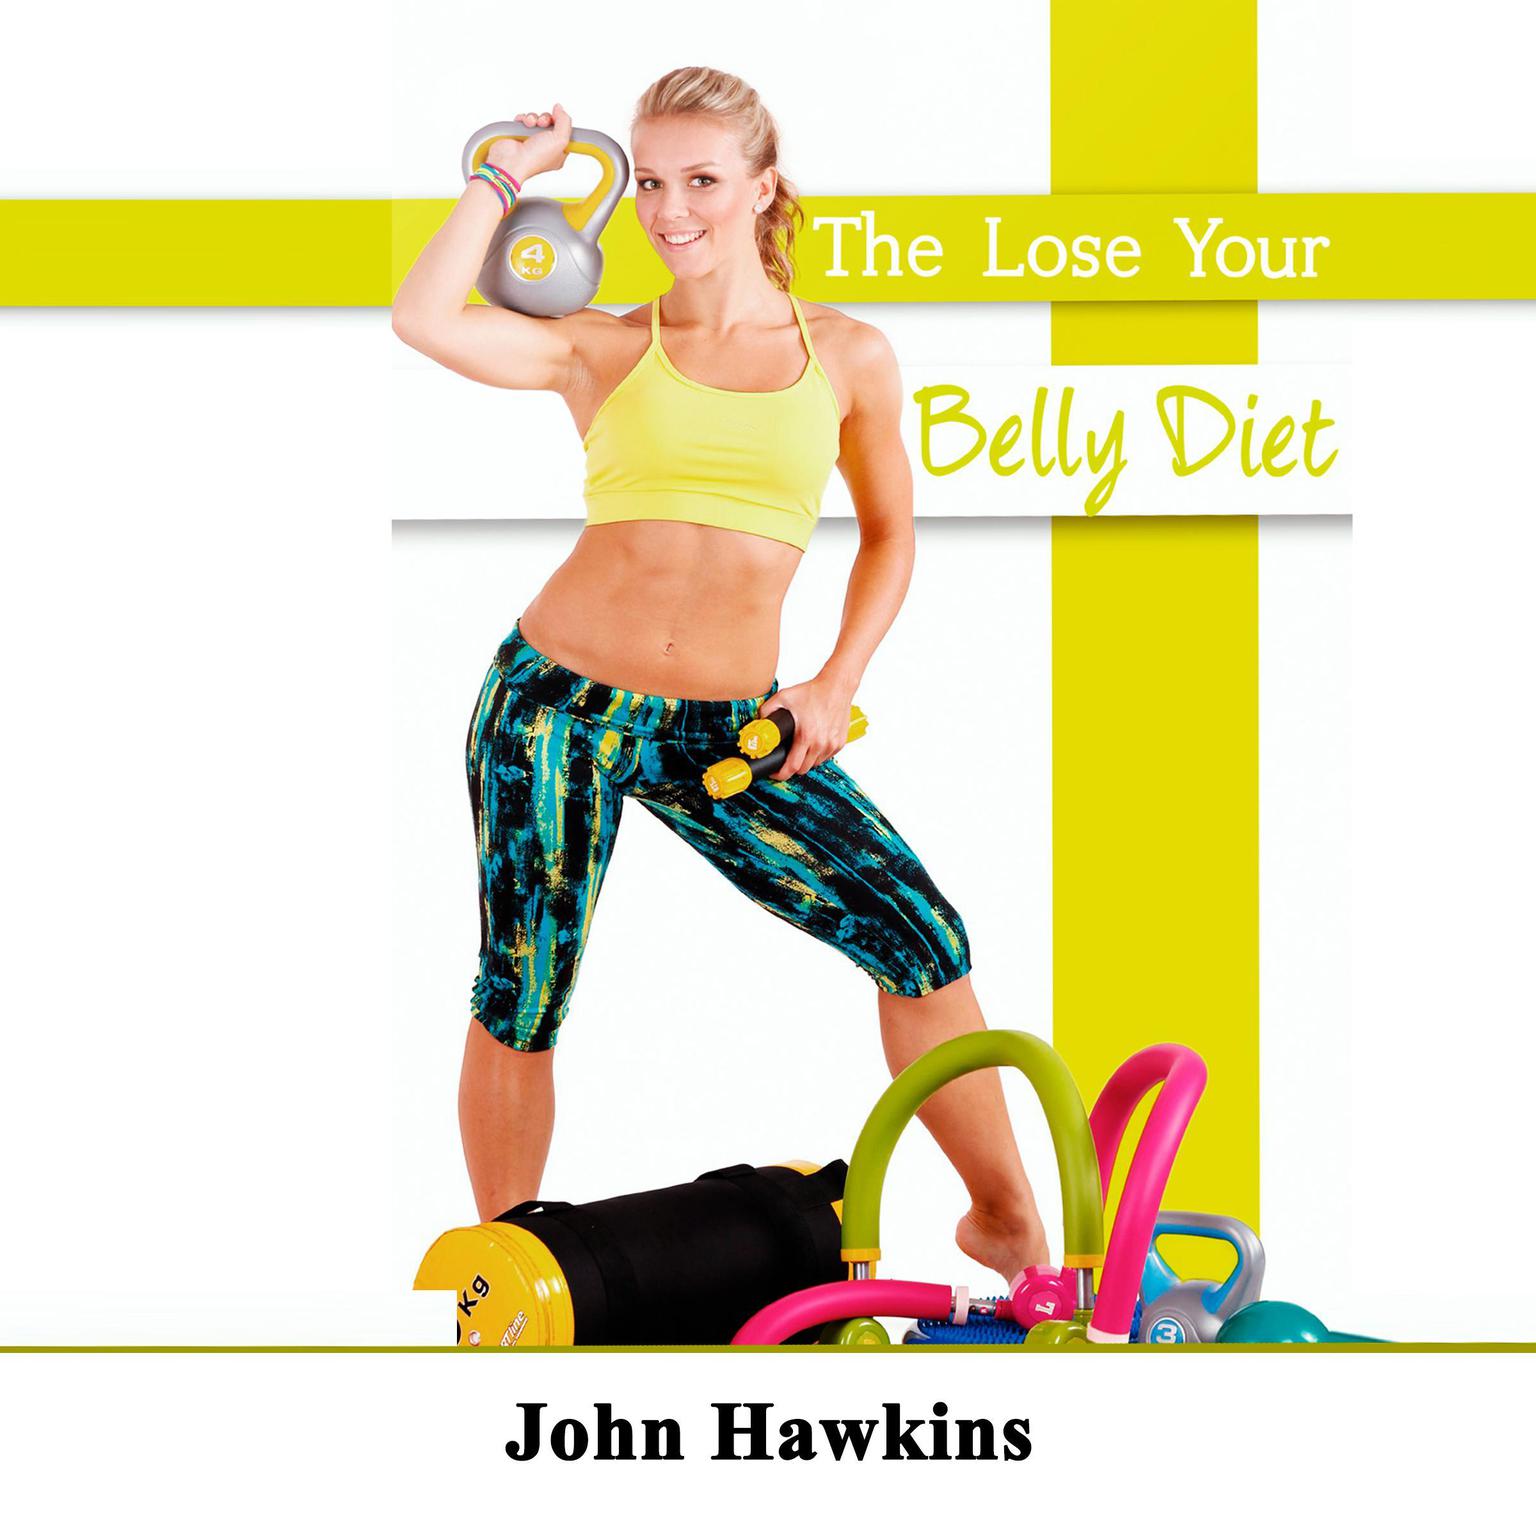 The Lose Your Belly Diet Audiobook By John Hawkins — Listen Now